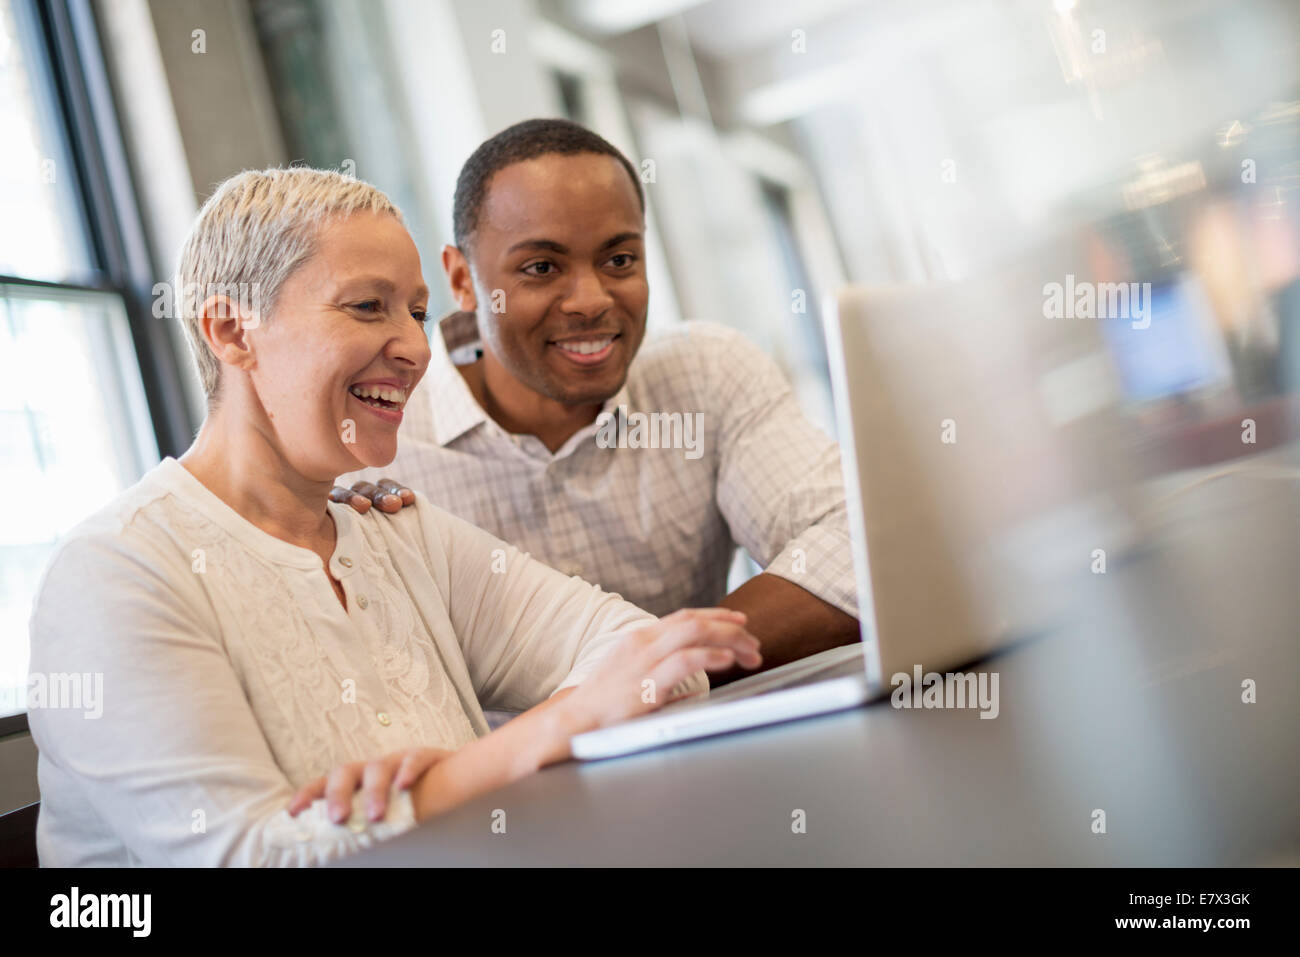 Office life. Two people, a man and woman looking at a laptop screen and laughing. Stock Photo